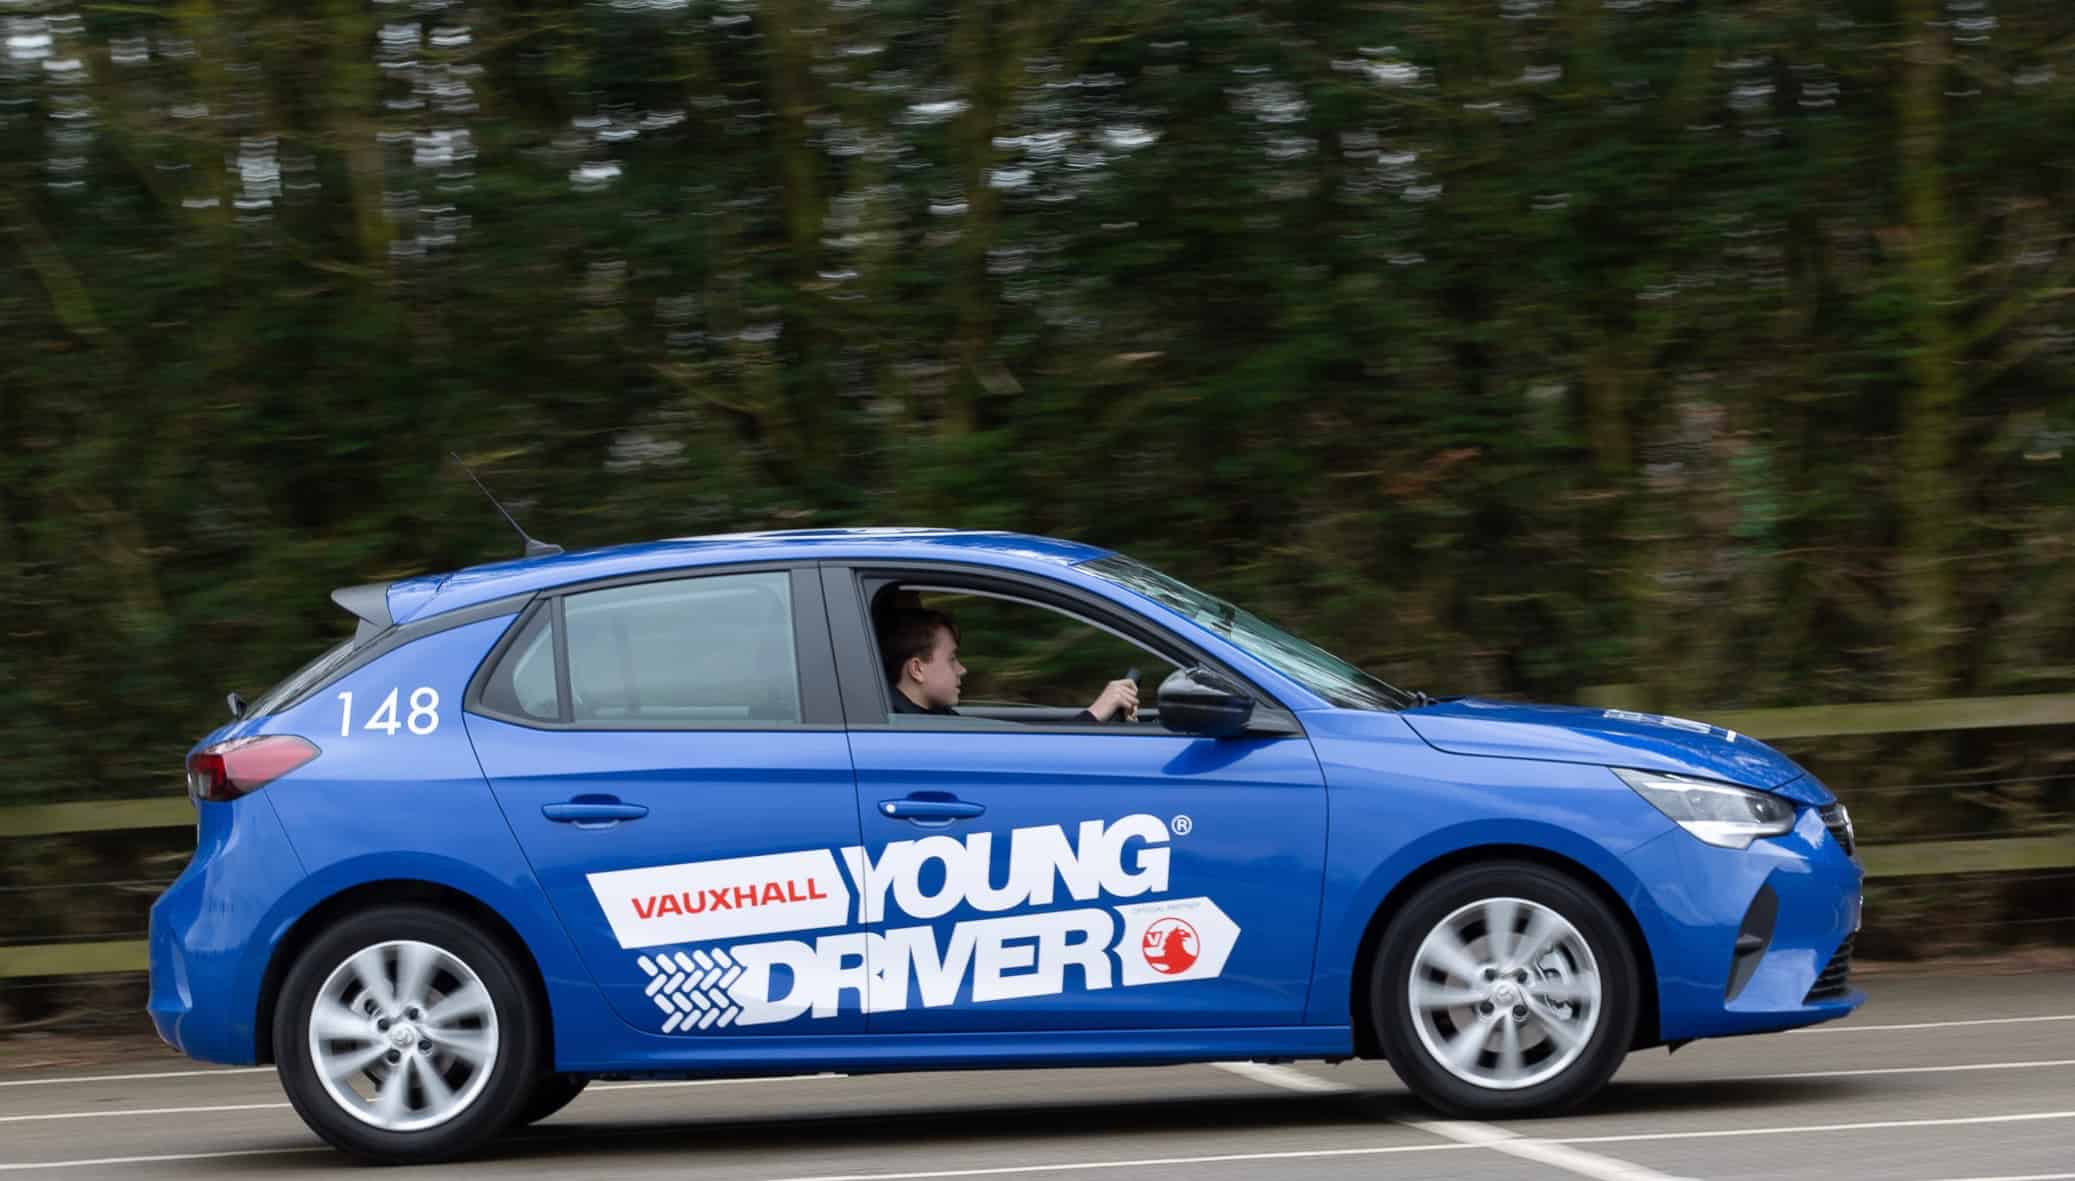 10-yer-old drivers, UK youngsters as young as 10 can take driver training, ClassicCars.com Journal